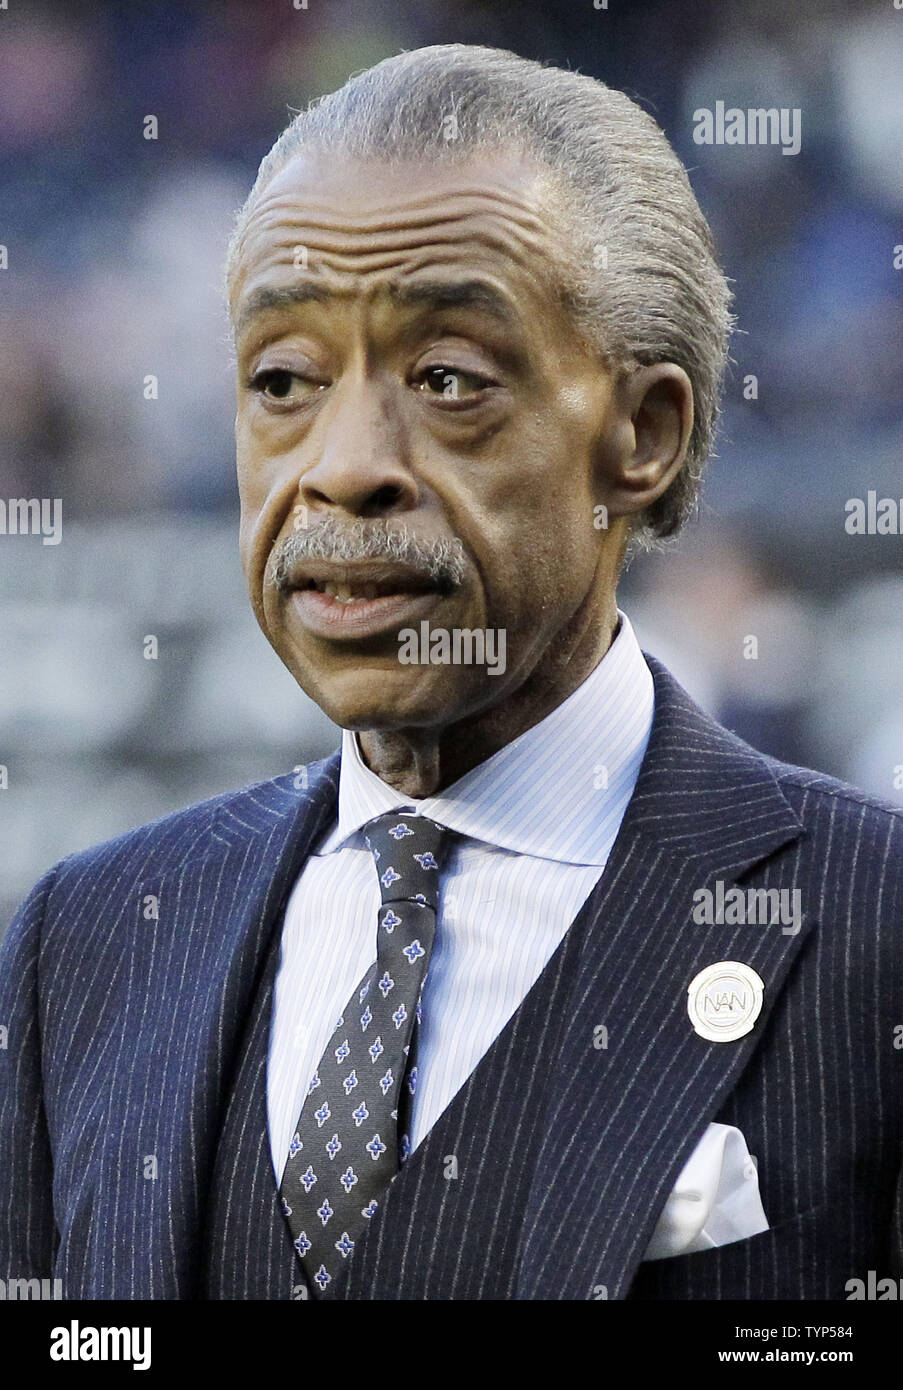 Rev. Al Sharpton stands on the field after a plaque is unveiled in Monument Park honoring the late South African President Nelson Mandela on Jackie Robinson Day in game 2 of a double header against the Chicago Cubs at Yankee Stadium in New York City on April 16, 2014. UPI/John Angelillo Stock Photo